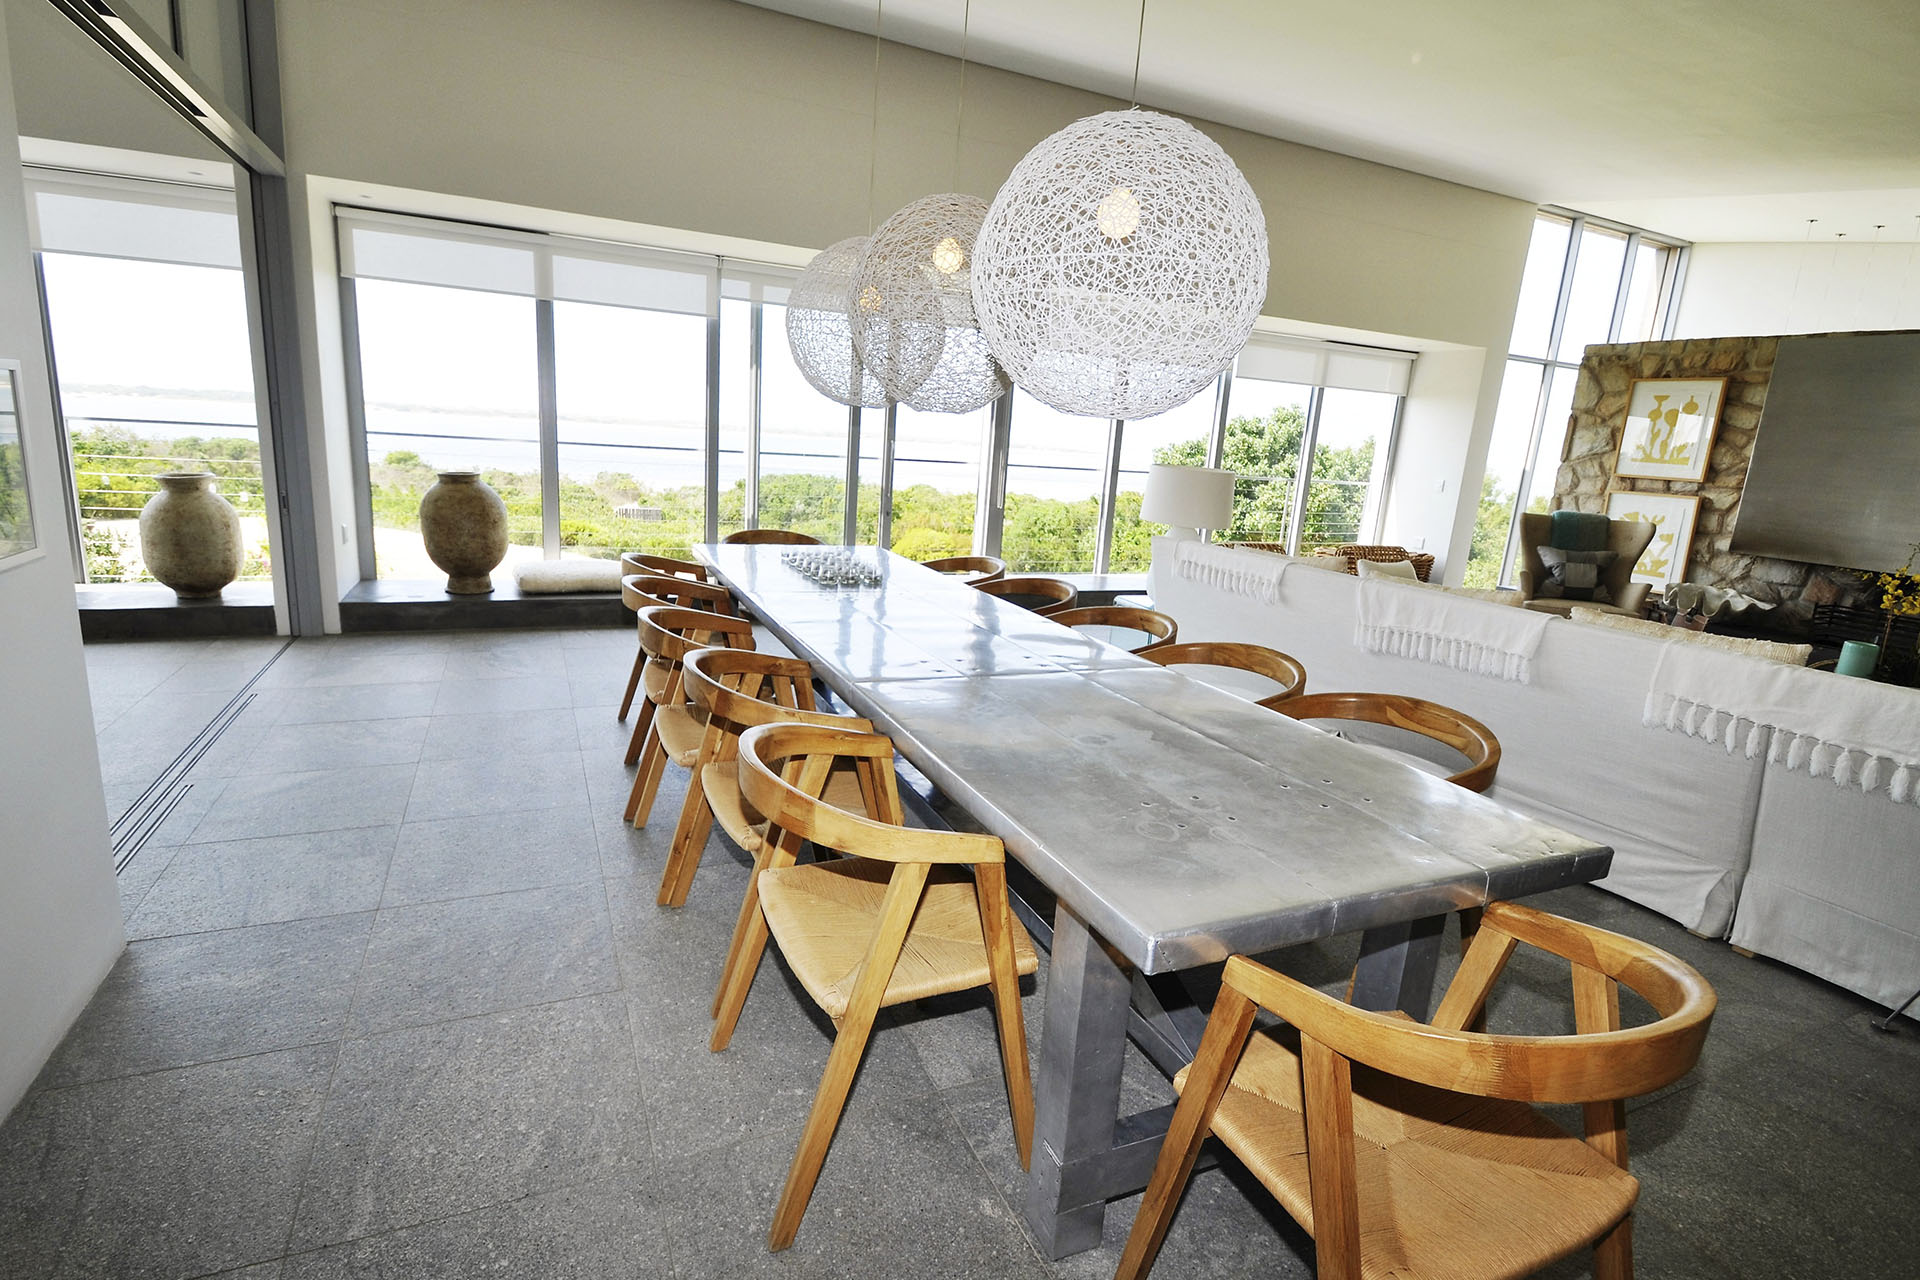 Photo 19 of The Dune House accommodation in Plettenberg Bay, Cape Town with 6 bedrooms and 7 bathrooms